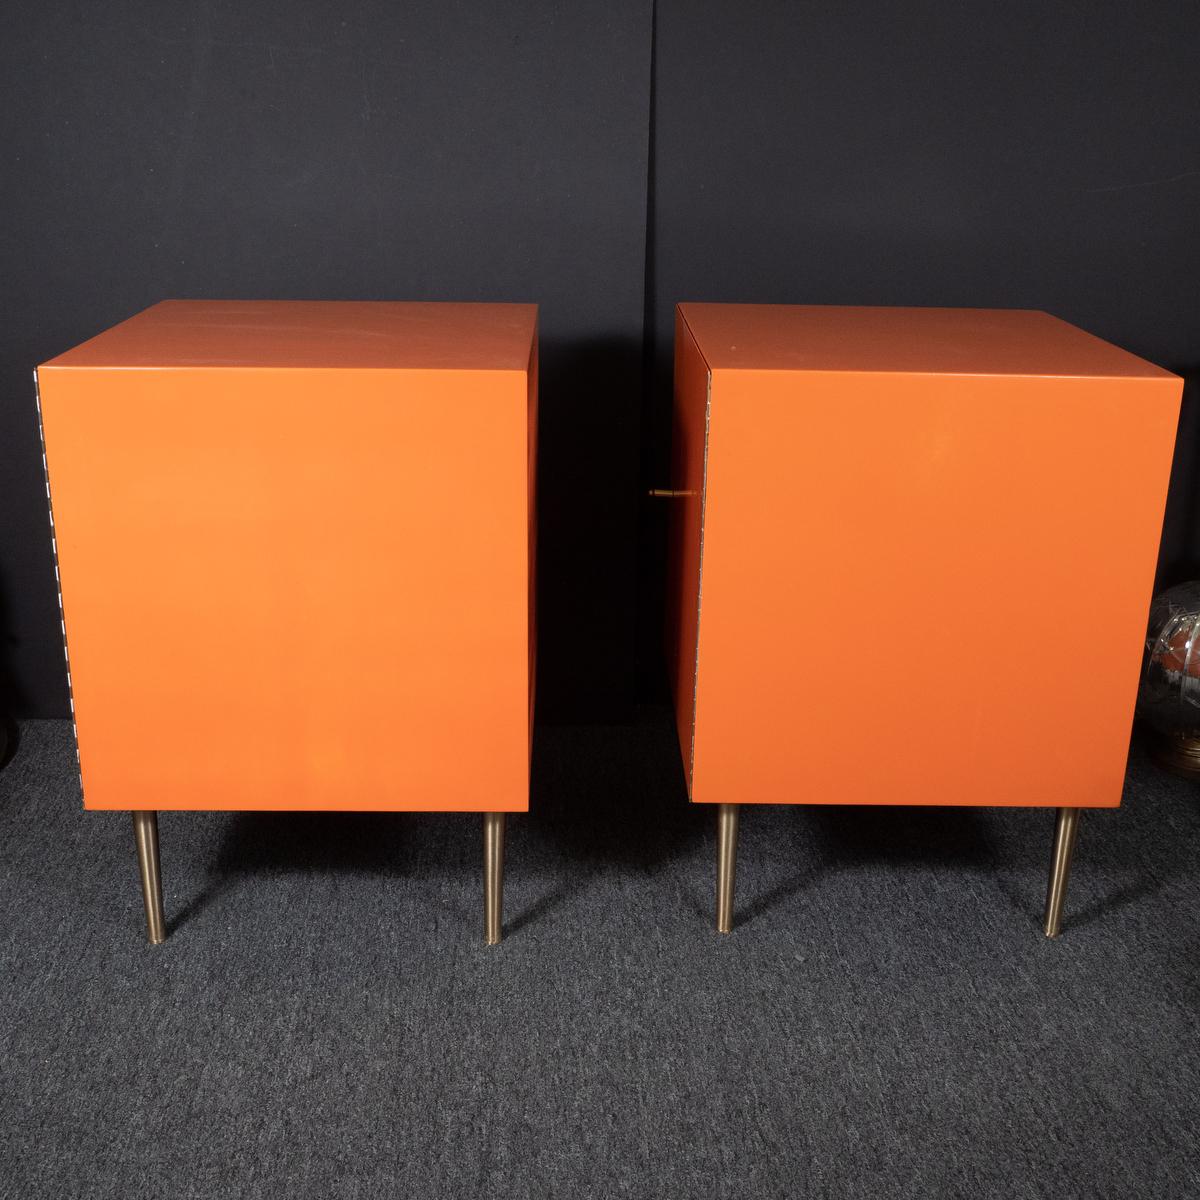 Late 20th Century Pair of Mid-Century Modern Cubic Orange Cabinets For Sale